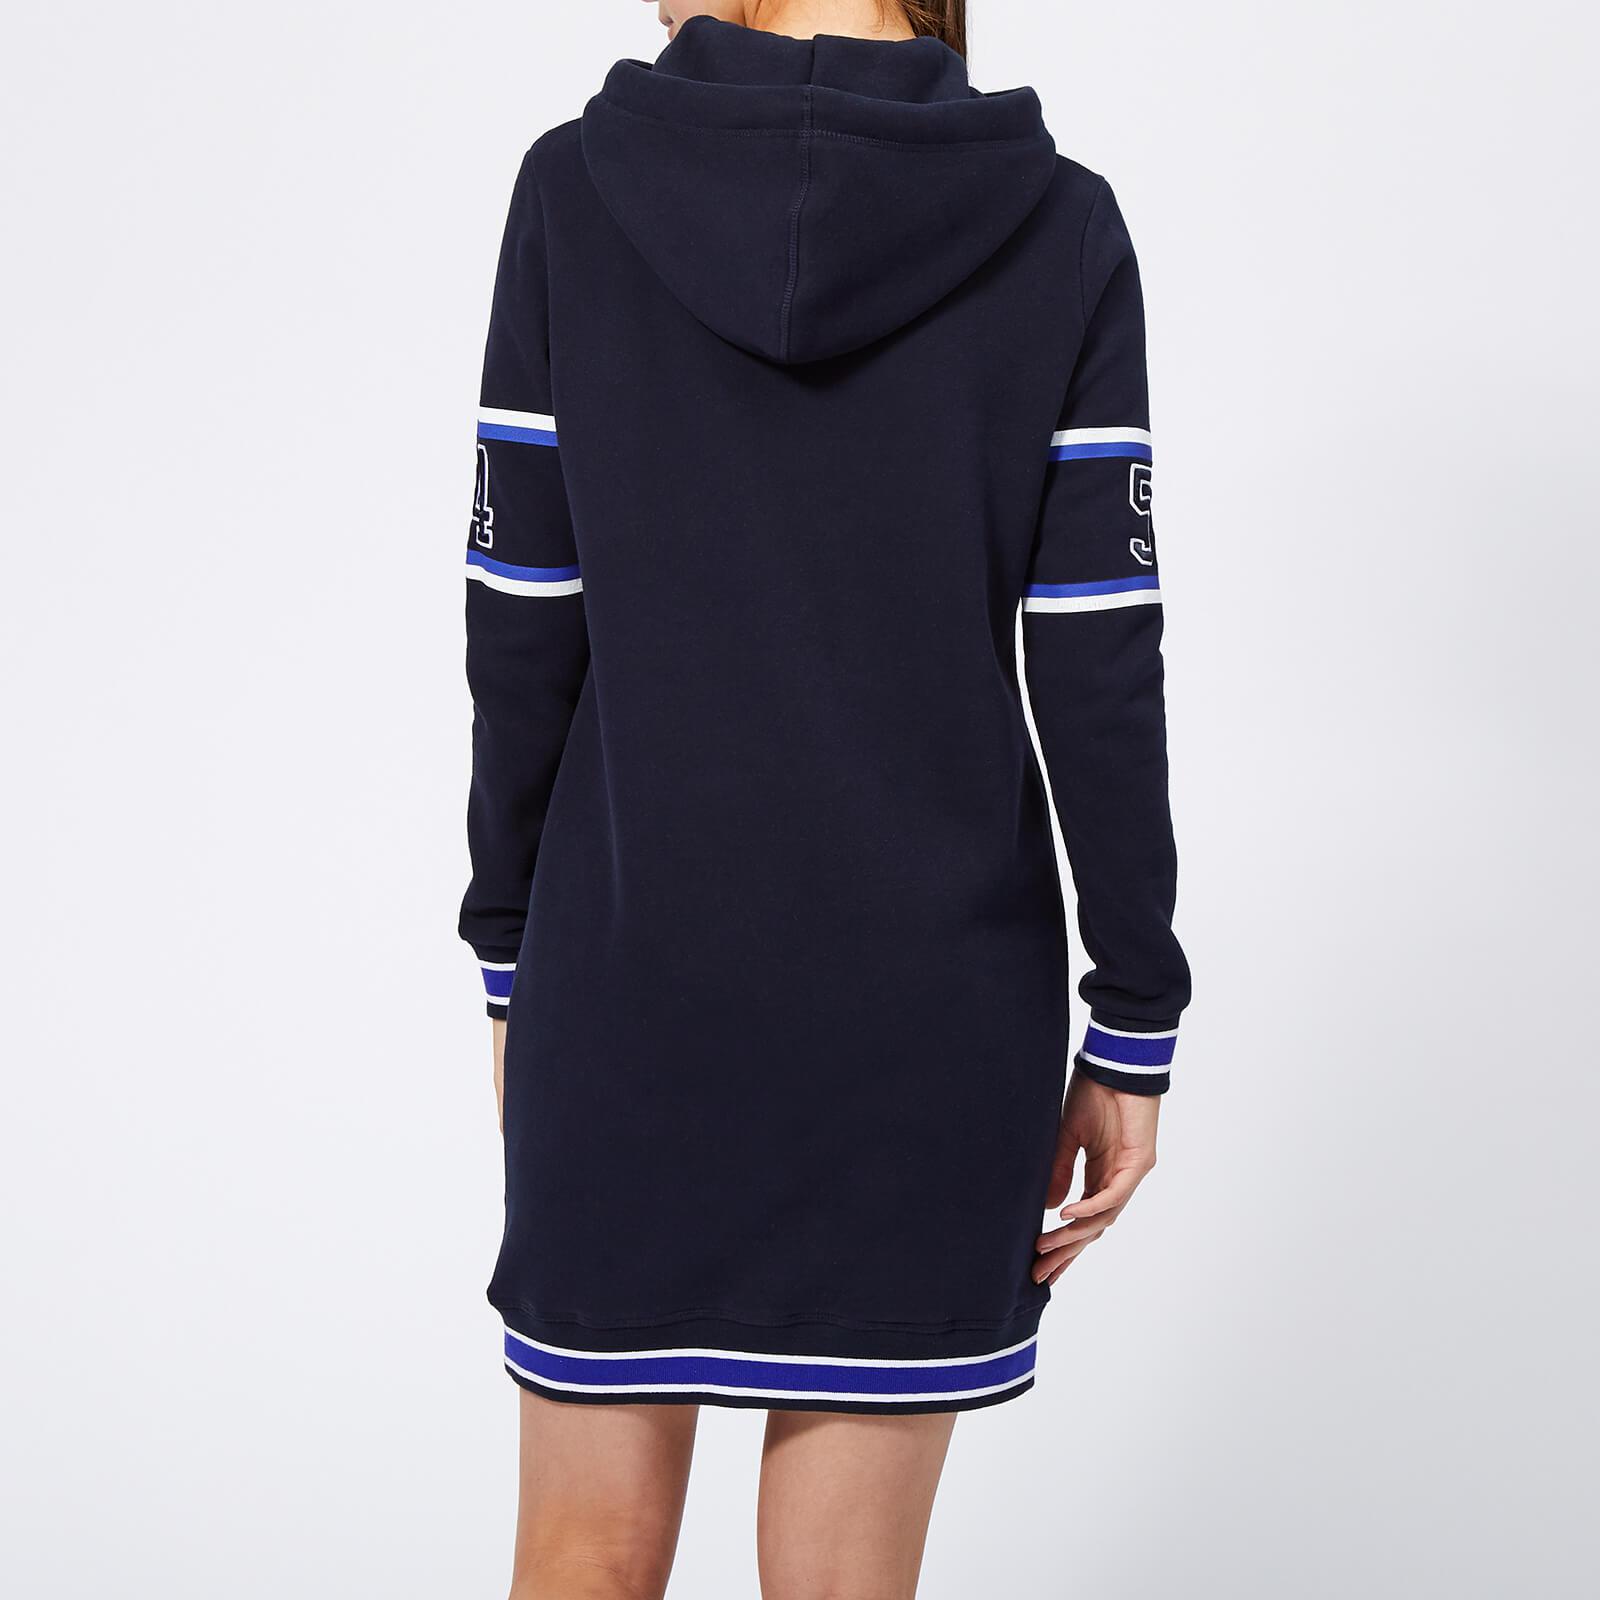 Superdry Beccy Sweat Dress Top Sellers, 47% OFF | avifauna.cz